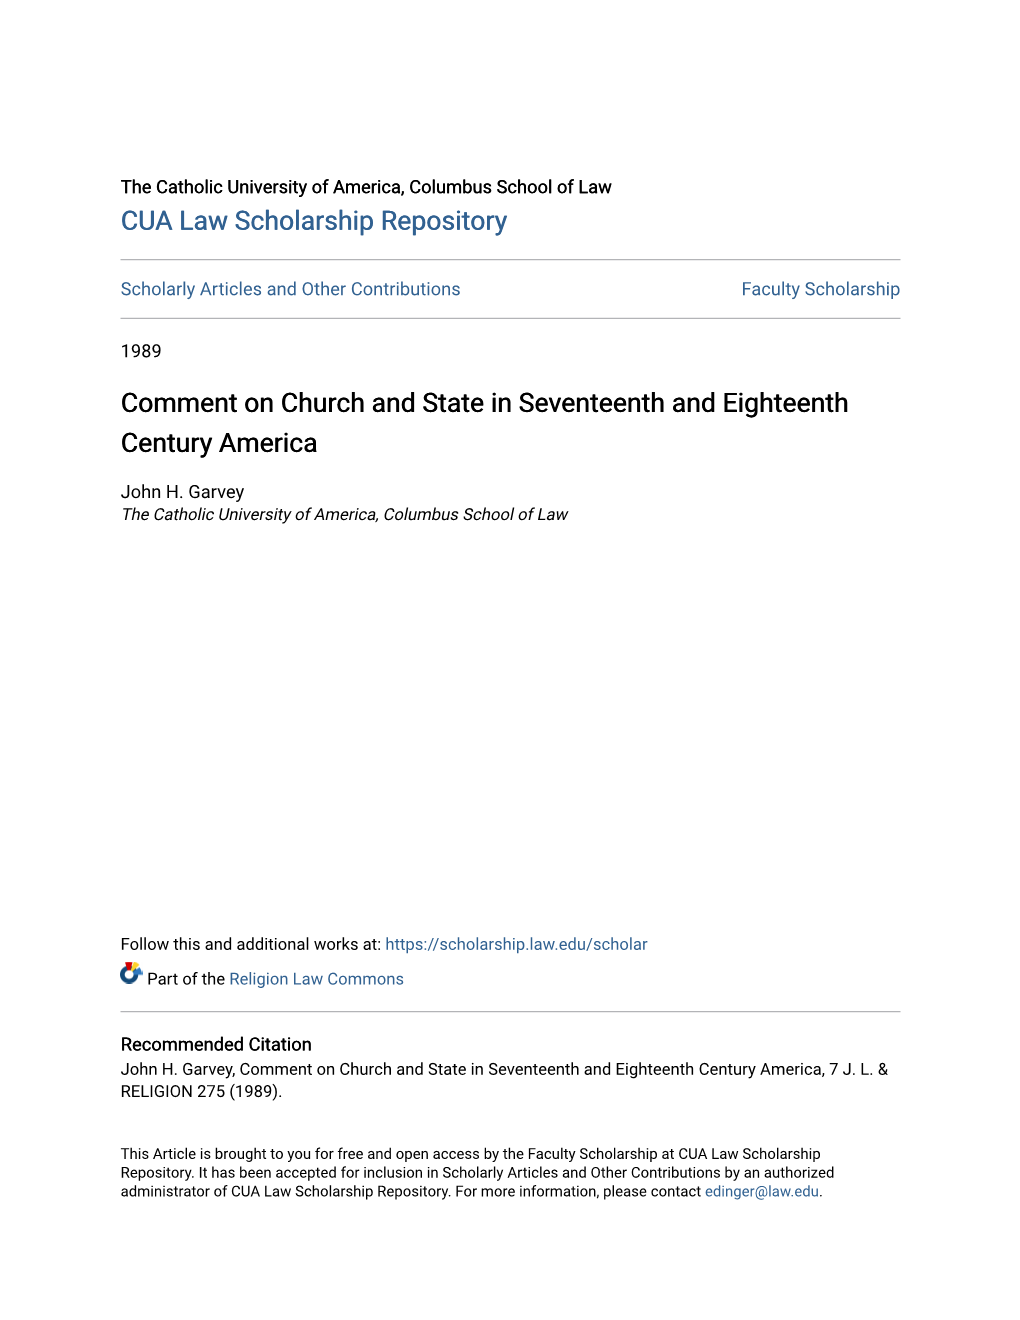 Comment on Church and State in Seventeenth and Eighteenth Century America